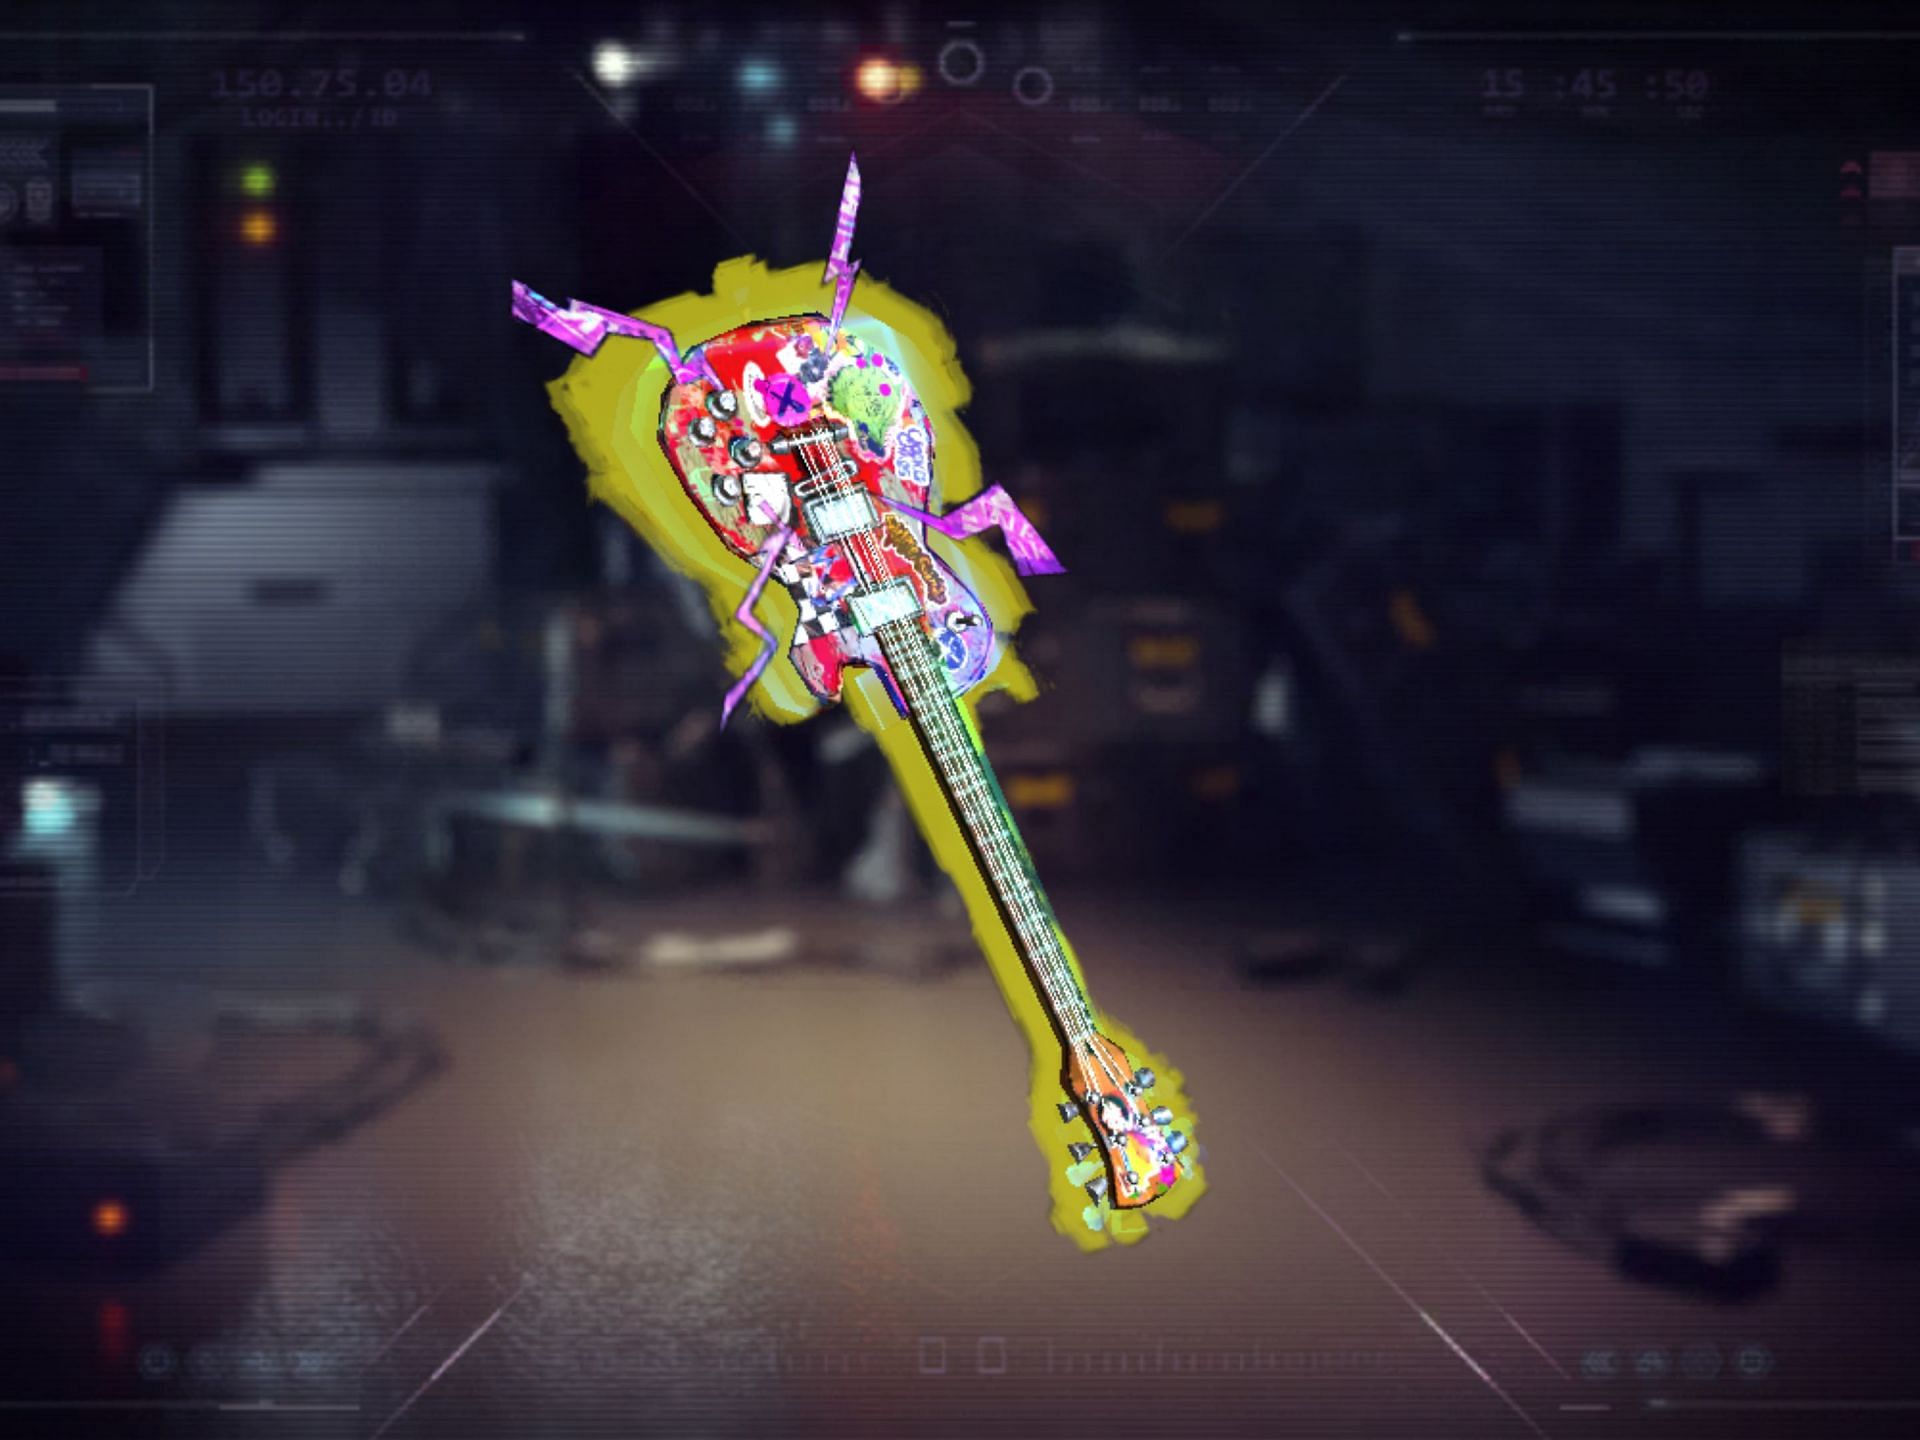 Punk Guitar is now available for free in Free Fire MAX (Image via Garena)